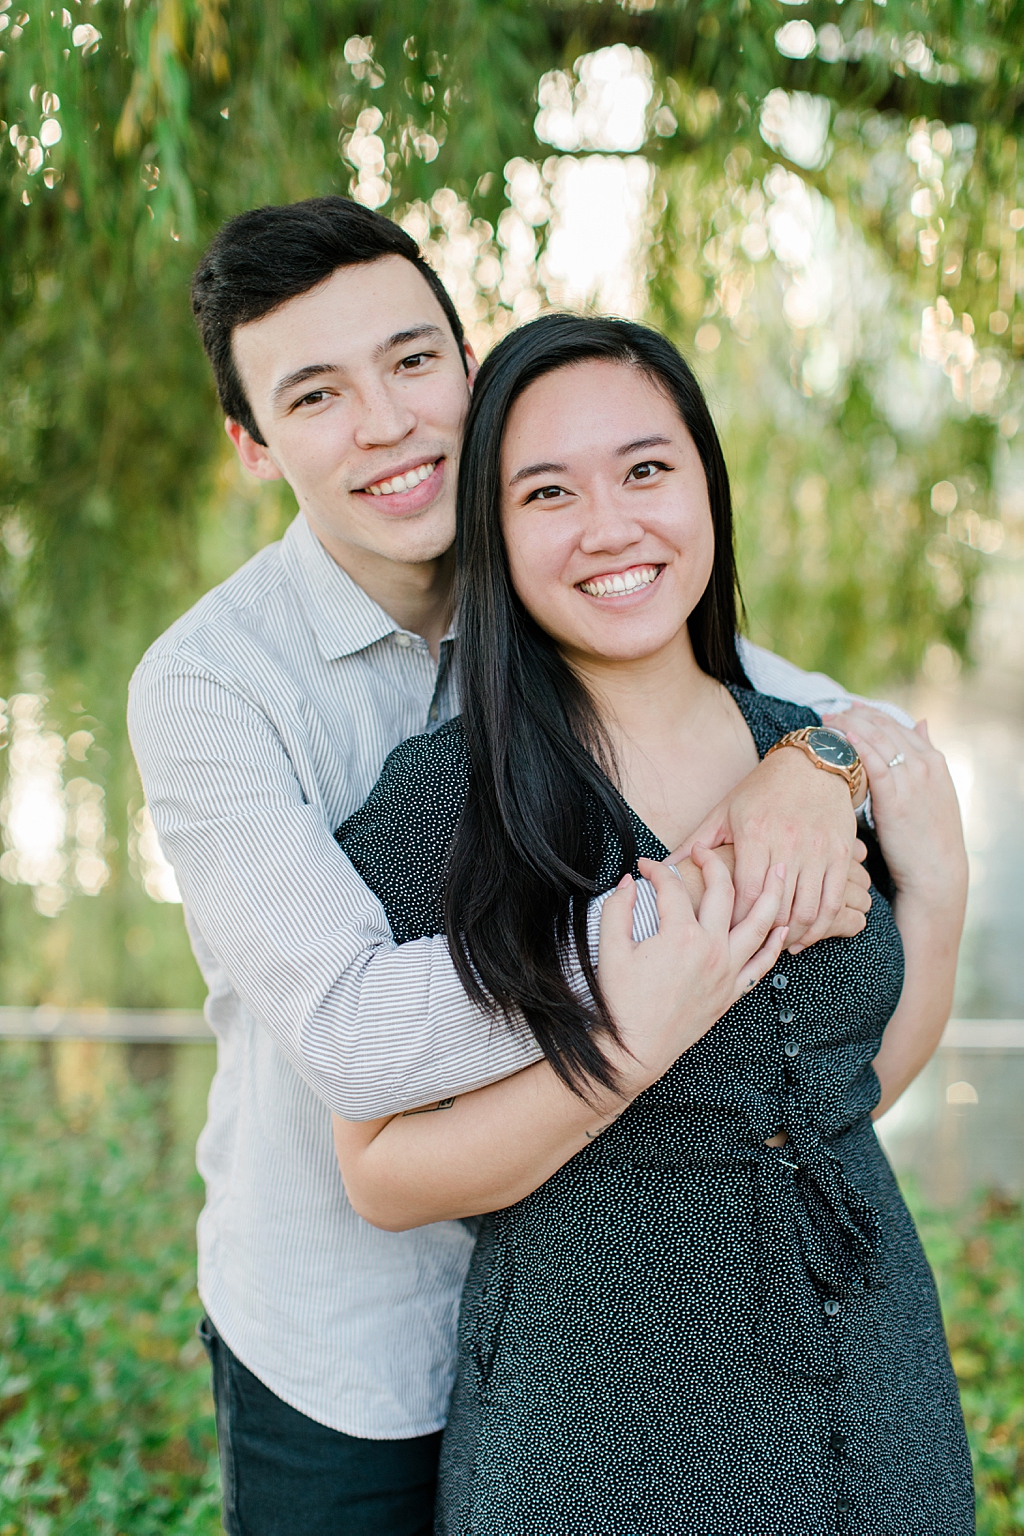 Becky_Collin_Navy_Yards_Park_The_Wharf_Washington_DC_Fall_Engagement_Session_AngelikaJohnsPhotography-7794.jpg